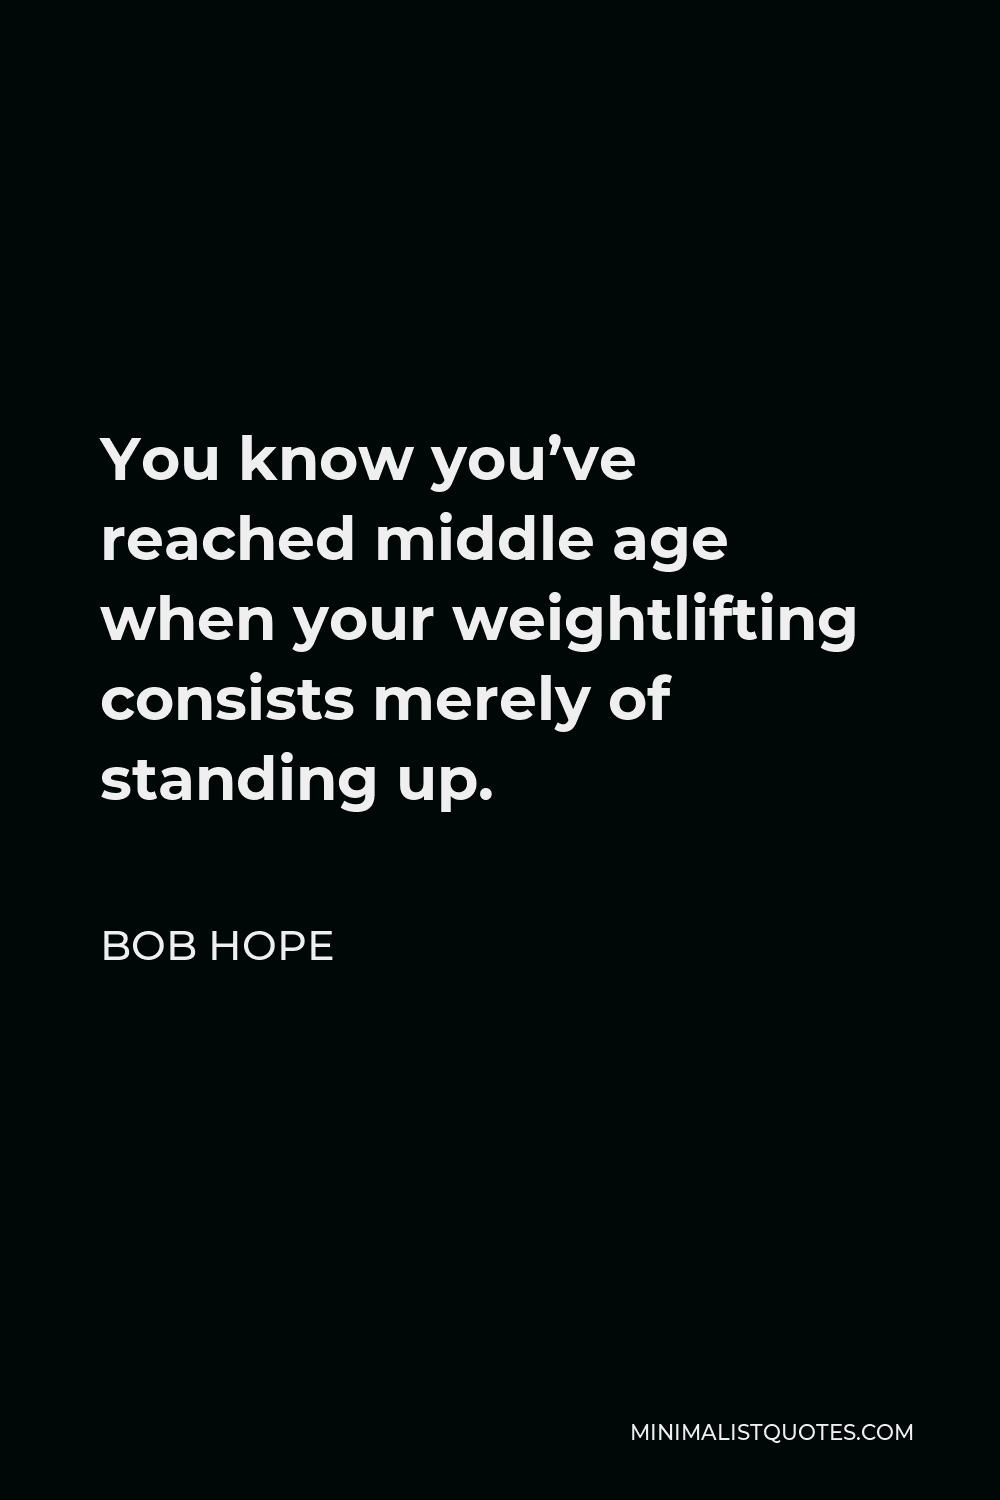 Bob Hope Quote - You know you’ve reached middle age when your weightlifting consists merely of standing up.